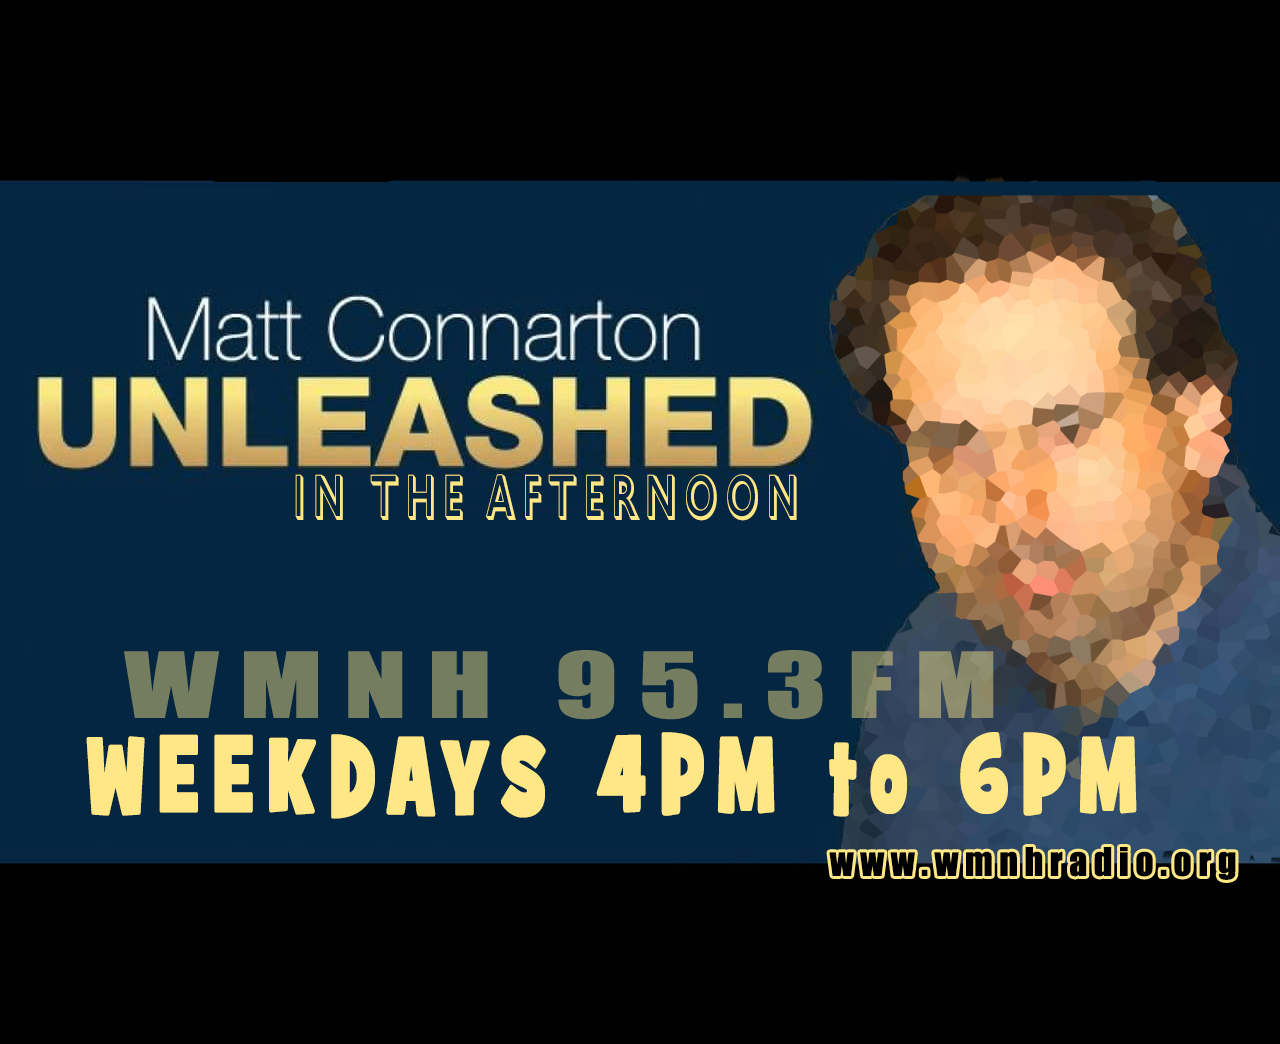 Matt Connarton Unleashed in the Afternoon 12-14-17